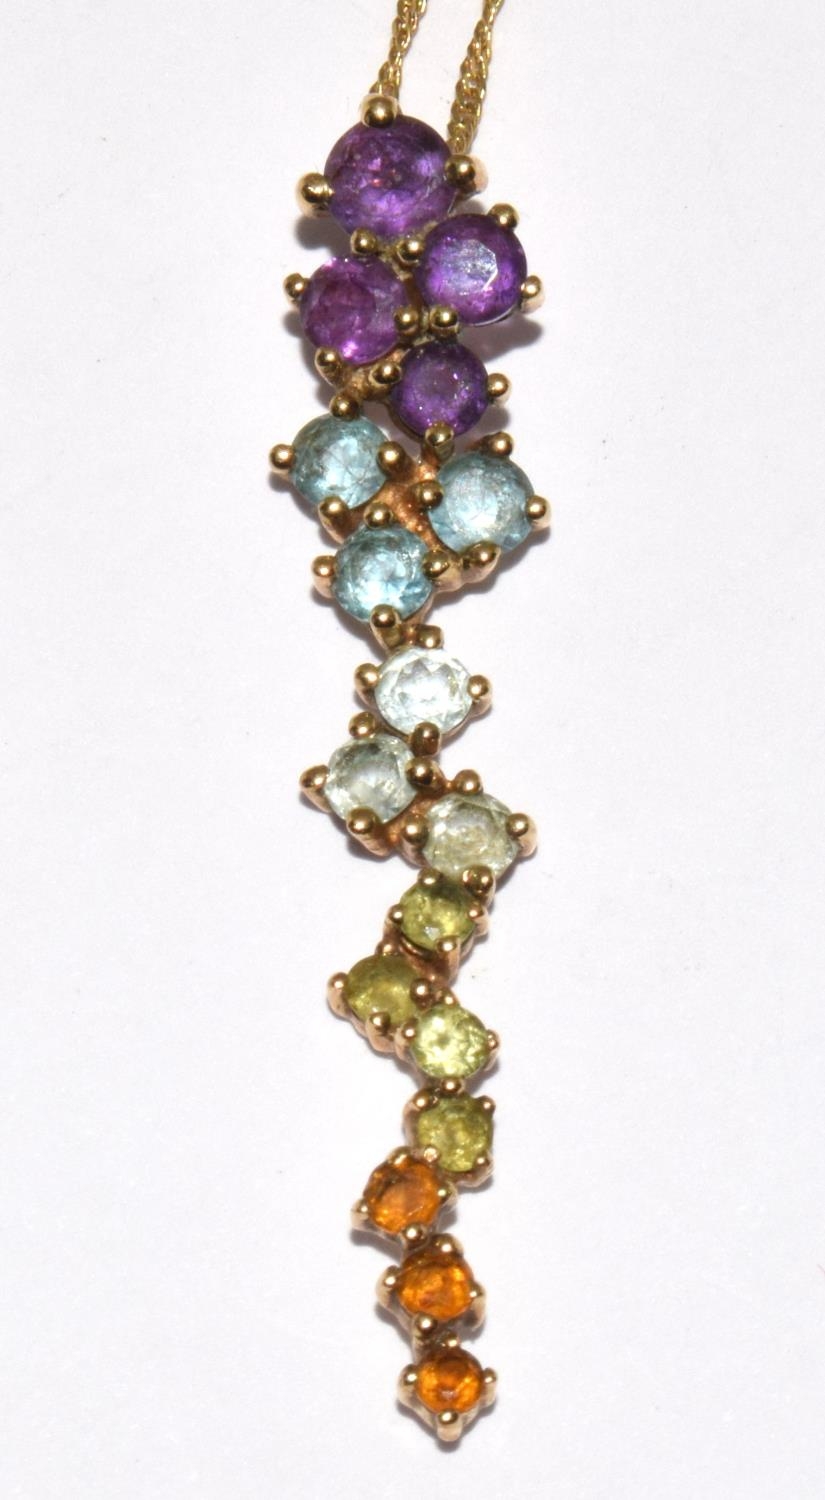 9ct gold Multi jem stone pendant necklace of Peridot, Topaz, Amethyst, and Citrine chain 46cm - Image 6 of 6